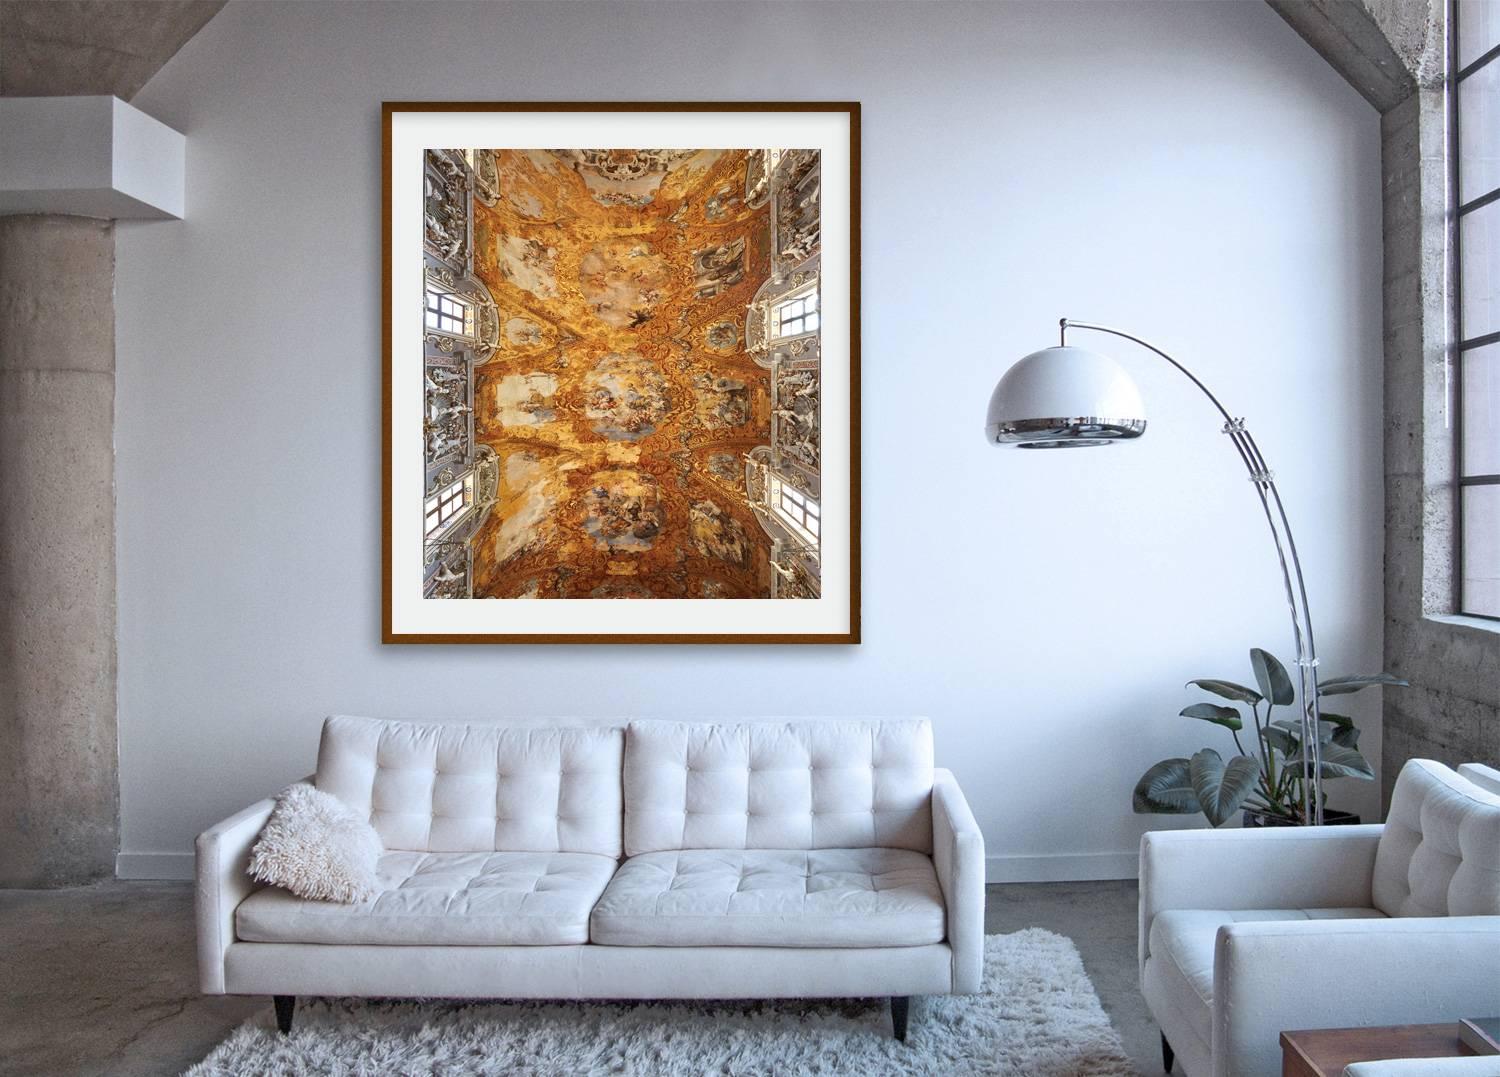 Hallelujah - large format photograph of baroque Italian palazzo fresco ceiling - Contemporary Print by Frank Schott